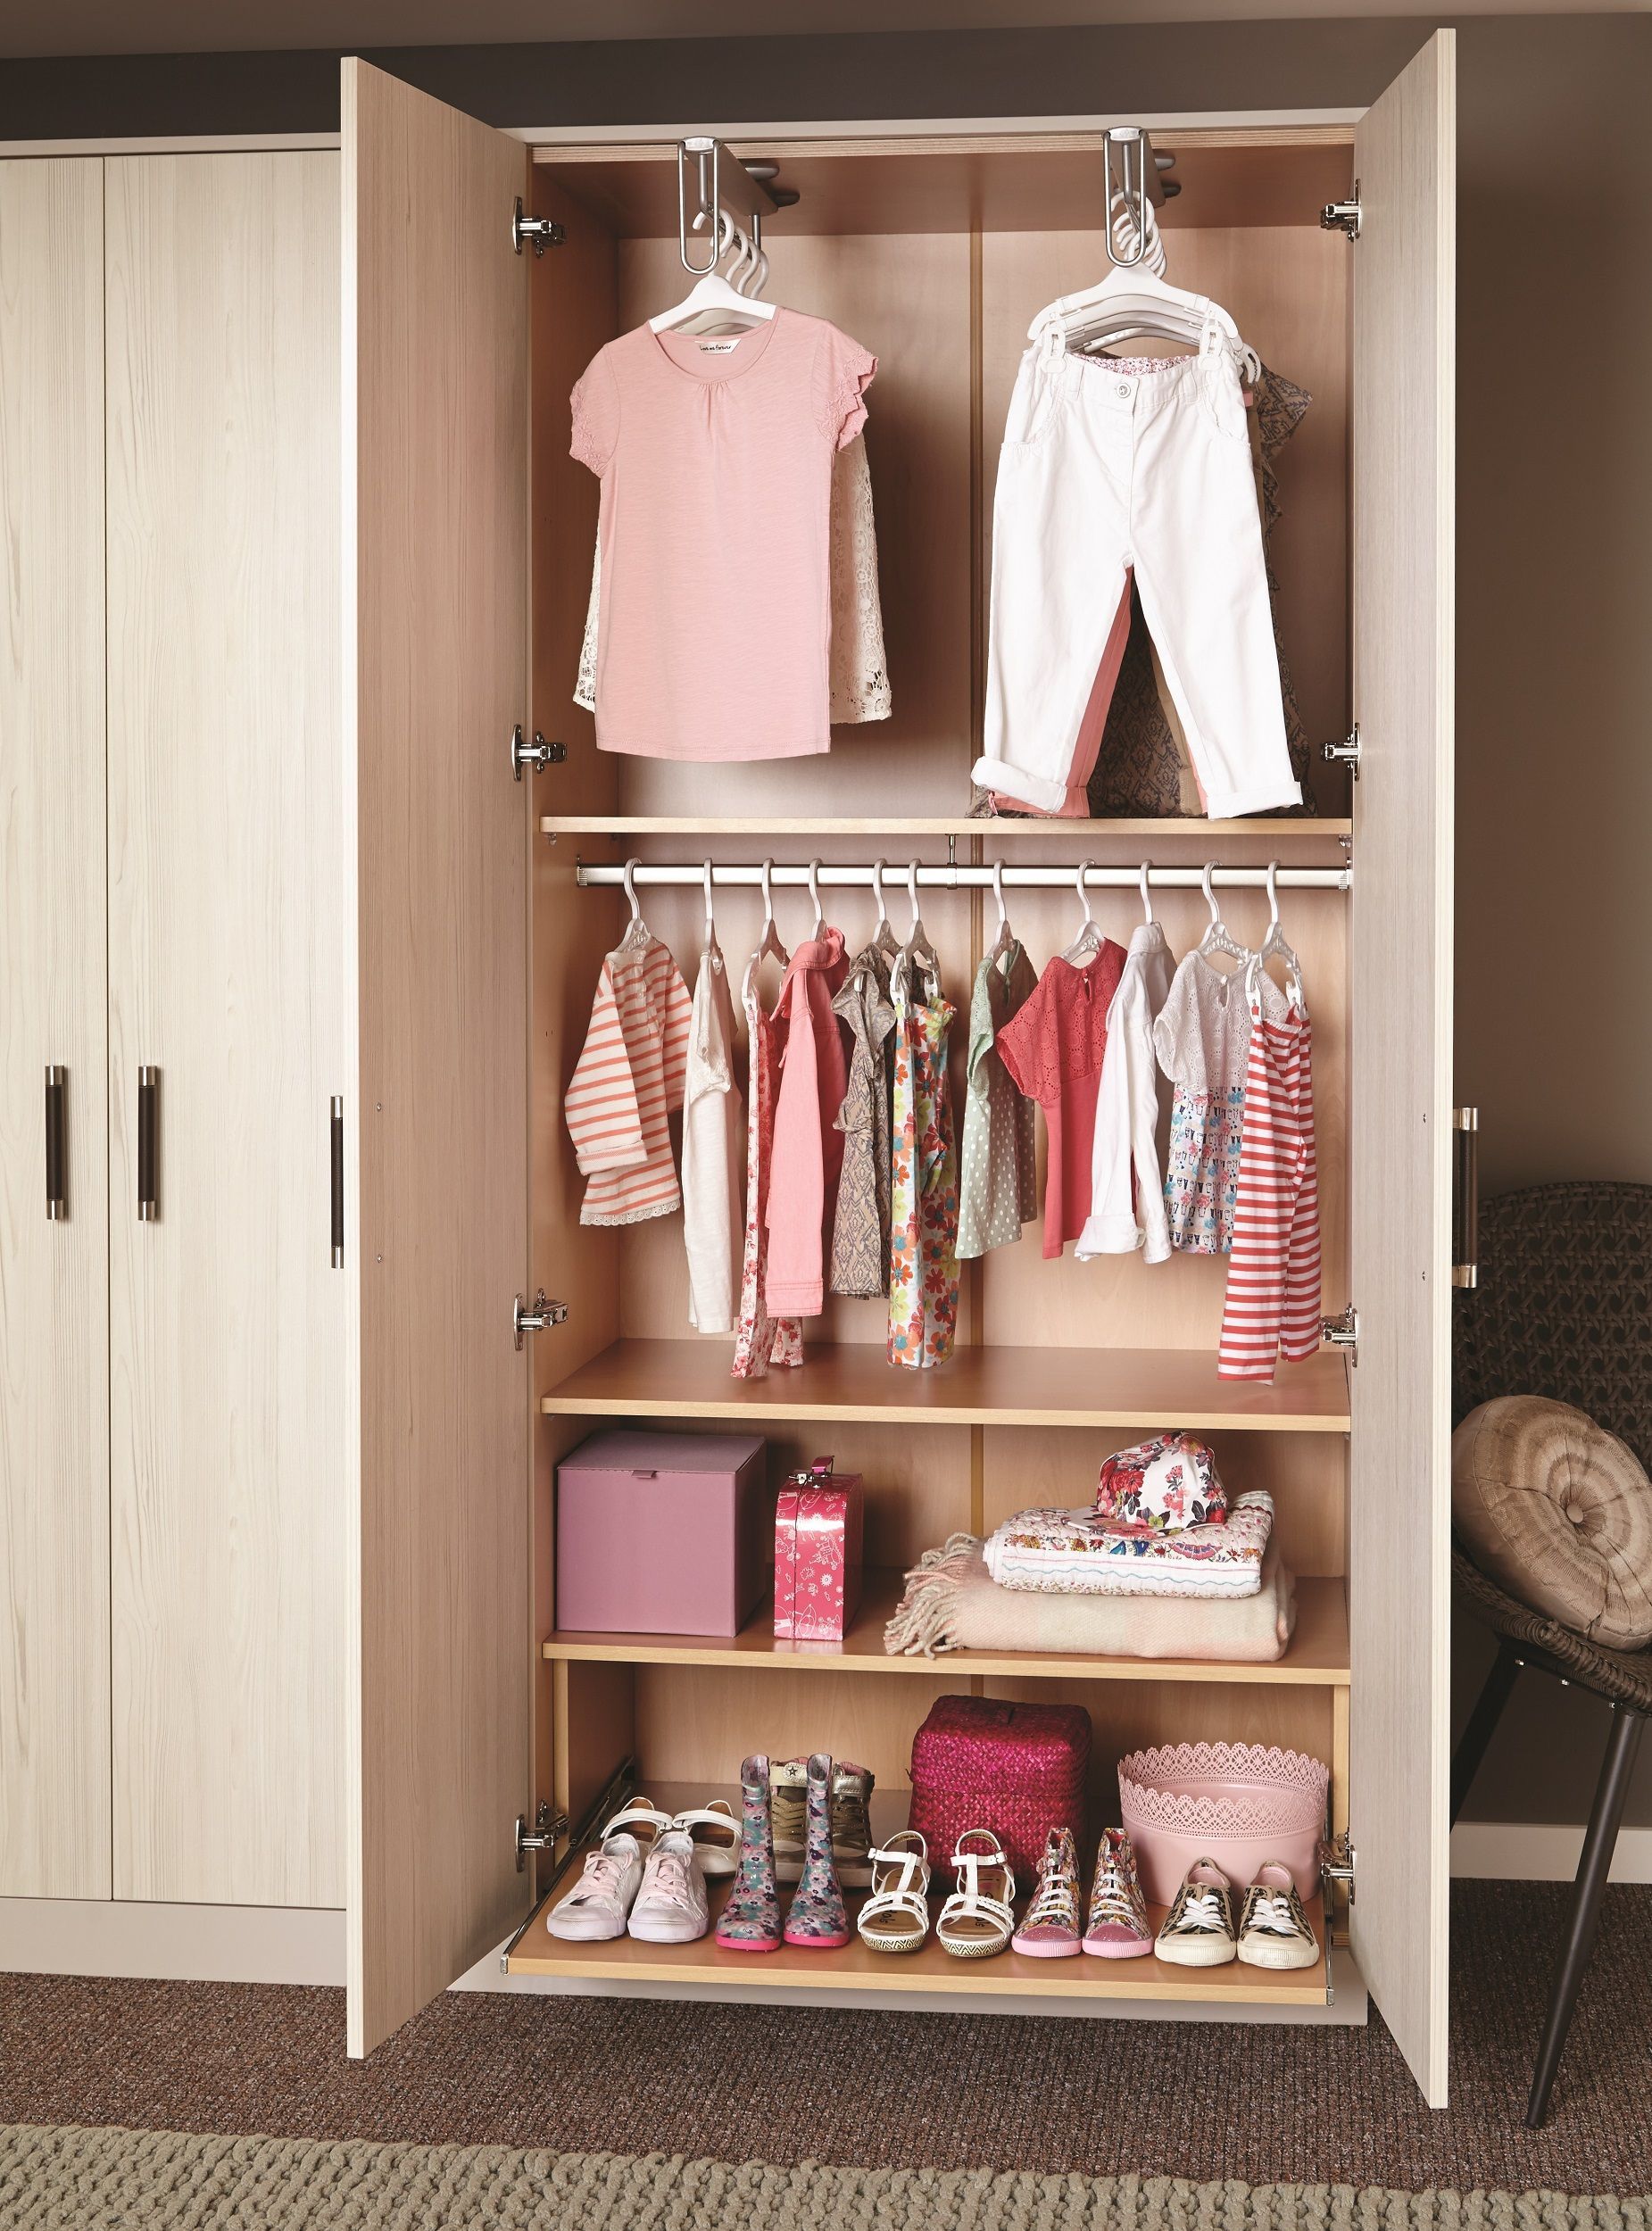 Pinterest Pertaining To Double Hanging Rail Wardrobes (View 5 of 15)